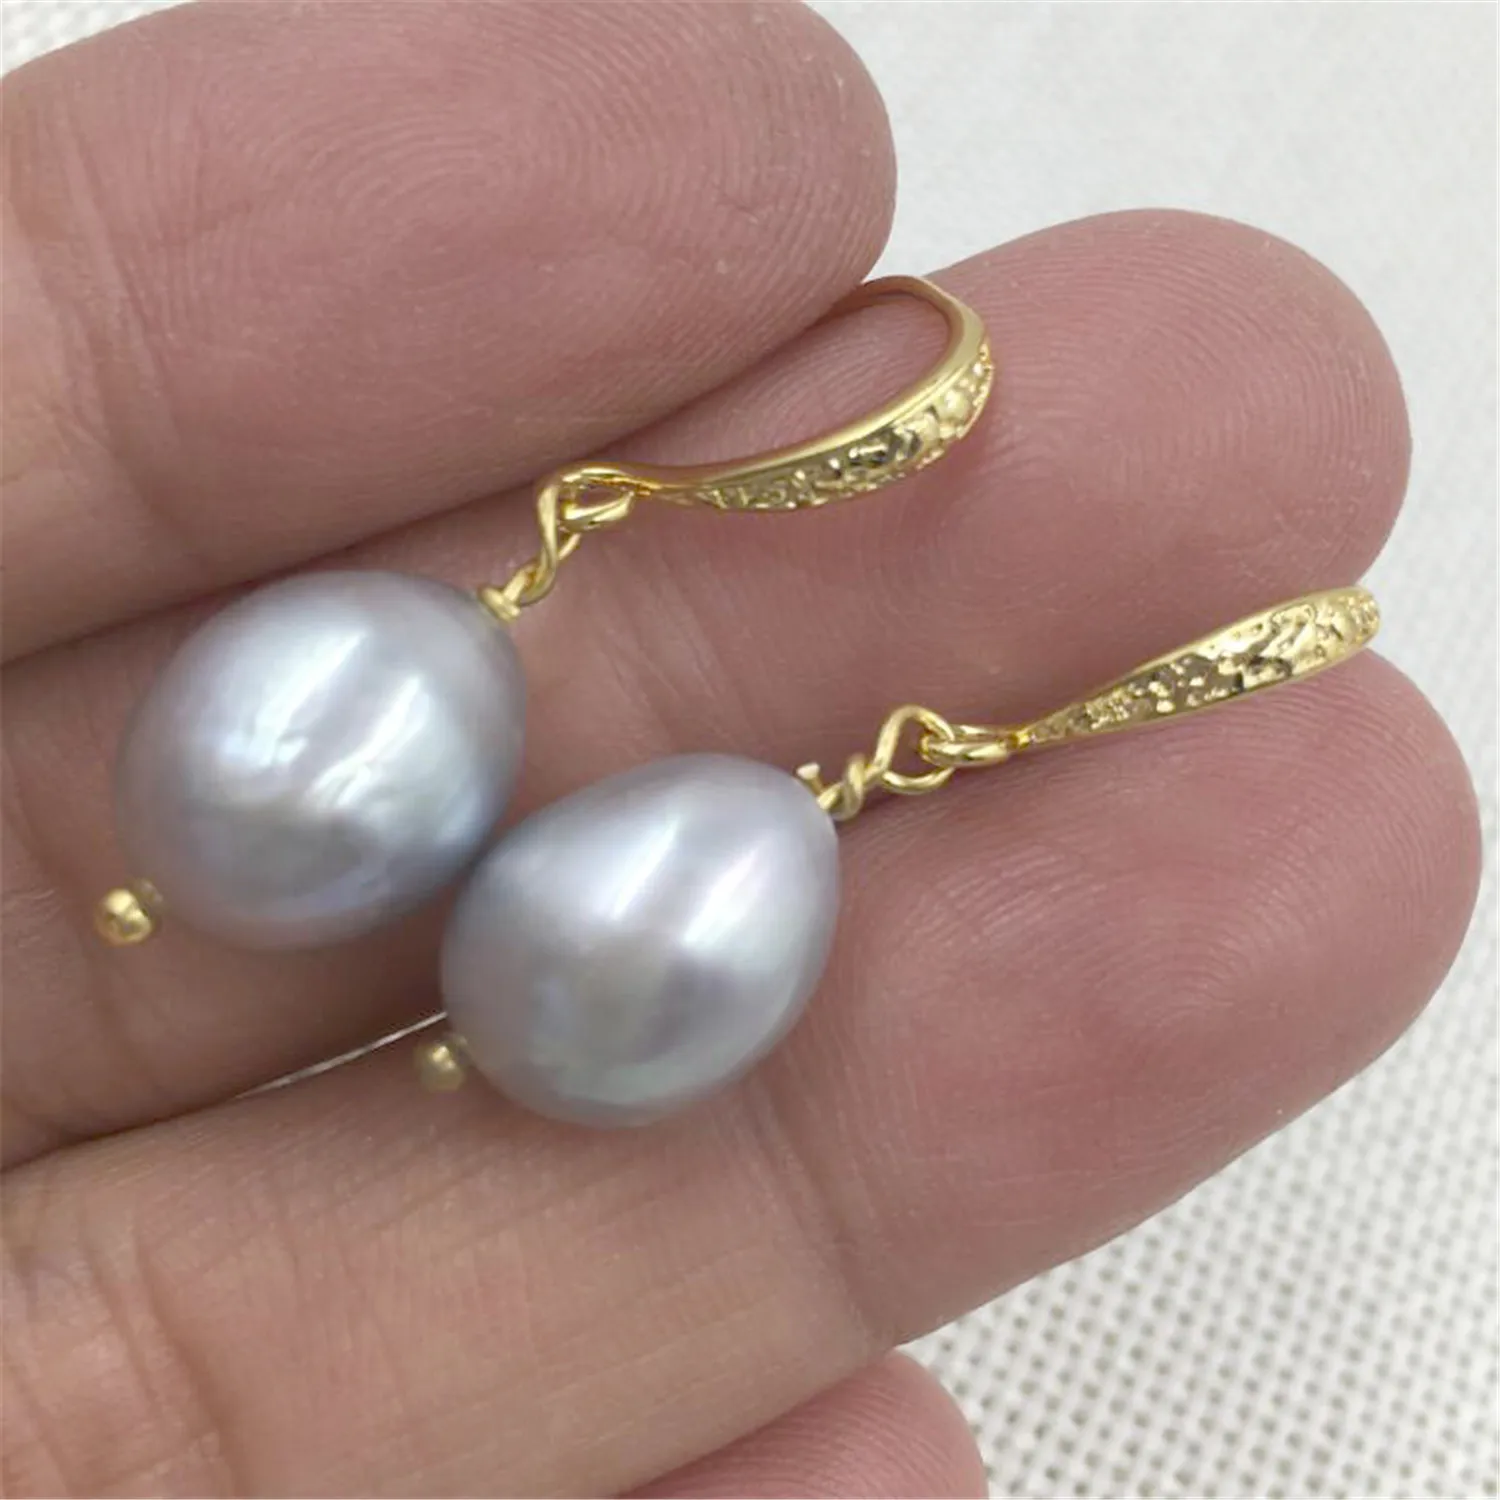 

10-12mm Huge Gray Baroque Pearl Earrings Gold Hook Classic Dangle Chic AAA Noble Gorgeous Elegant Fashion Luxury